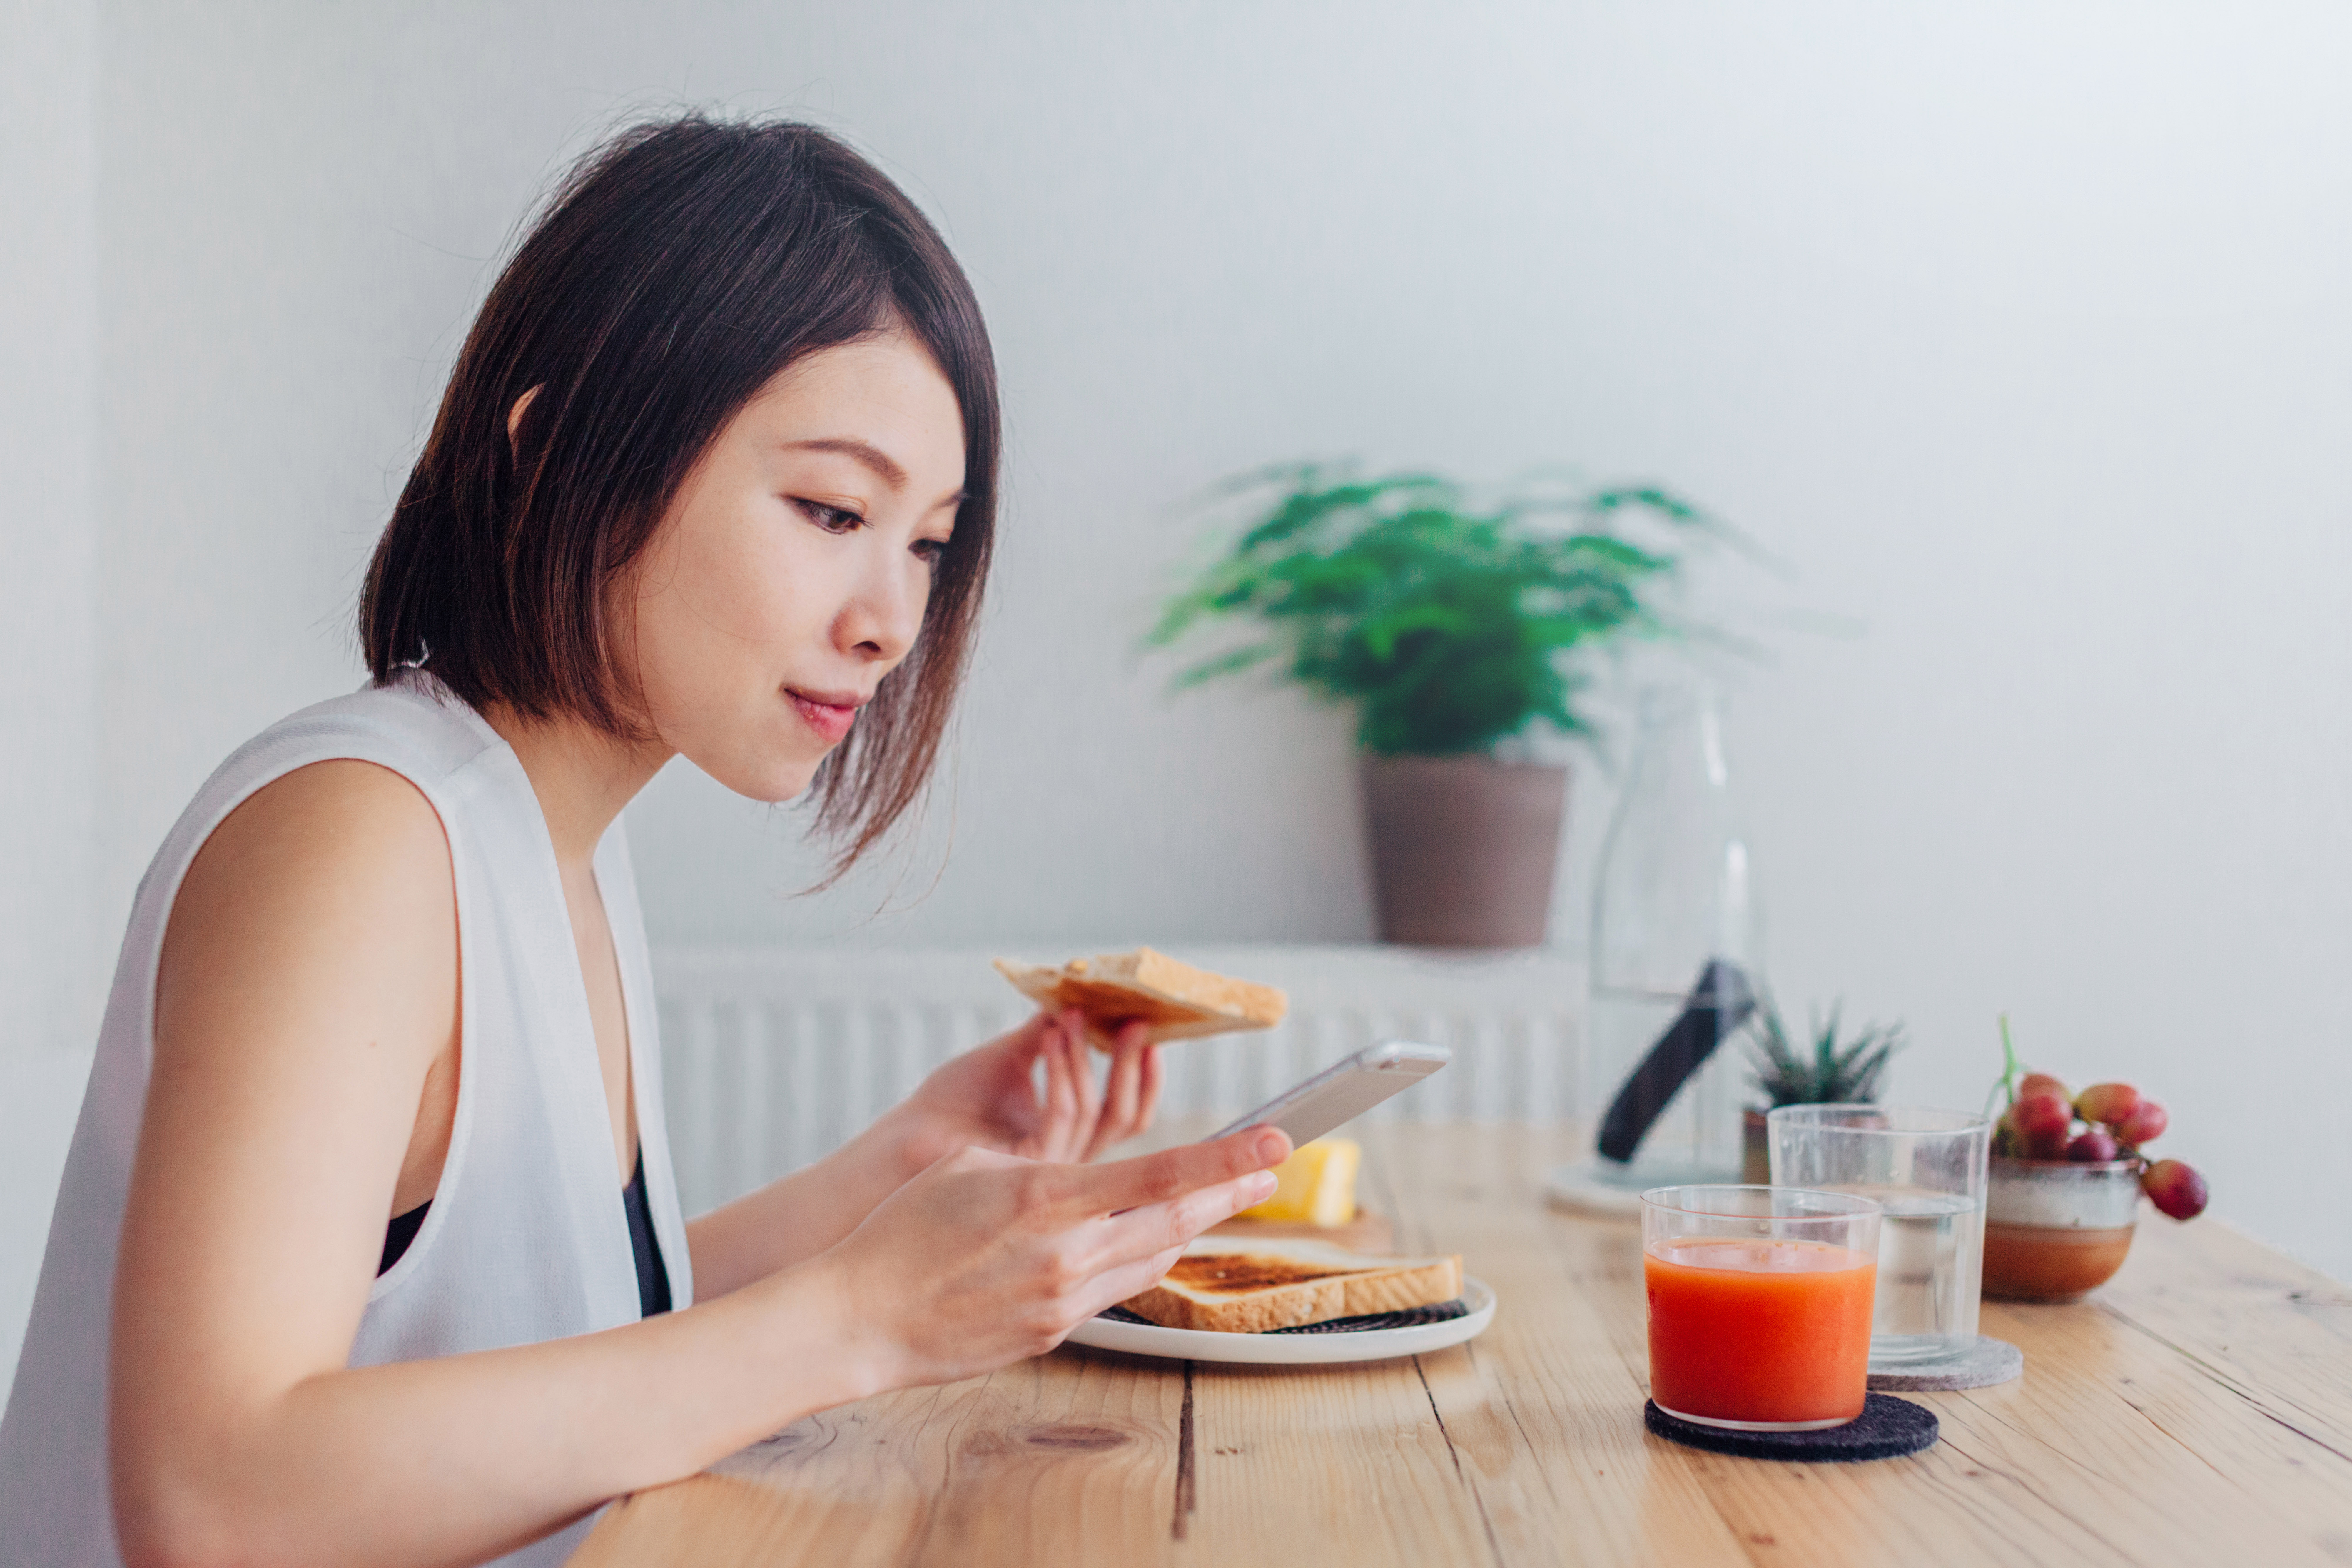 Asian woman eating toast while looking at her phone.